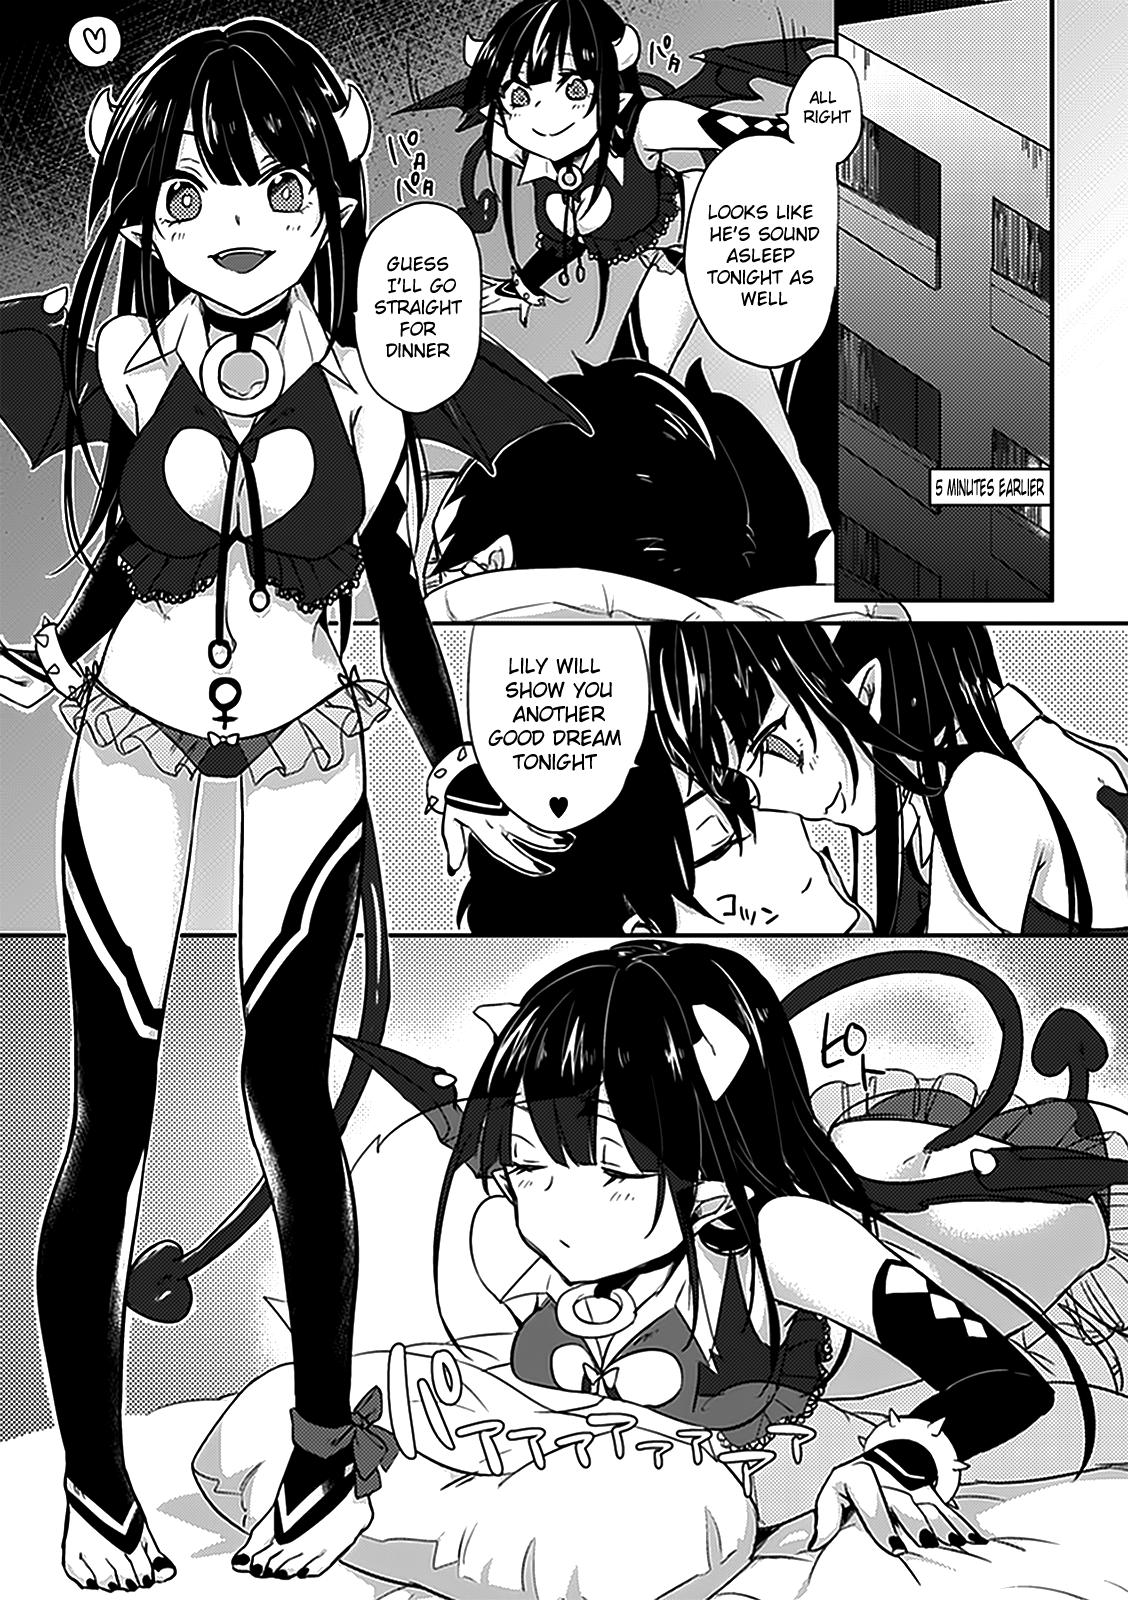 Sexy Whores [Niimaru Yuu] good-day good-night (Bessatsu COMIC Unreal Monster Musume Paradise Vol. 2) [English] [The Lusty Lady Project] Tattoos - Page 2